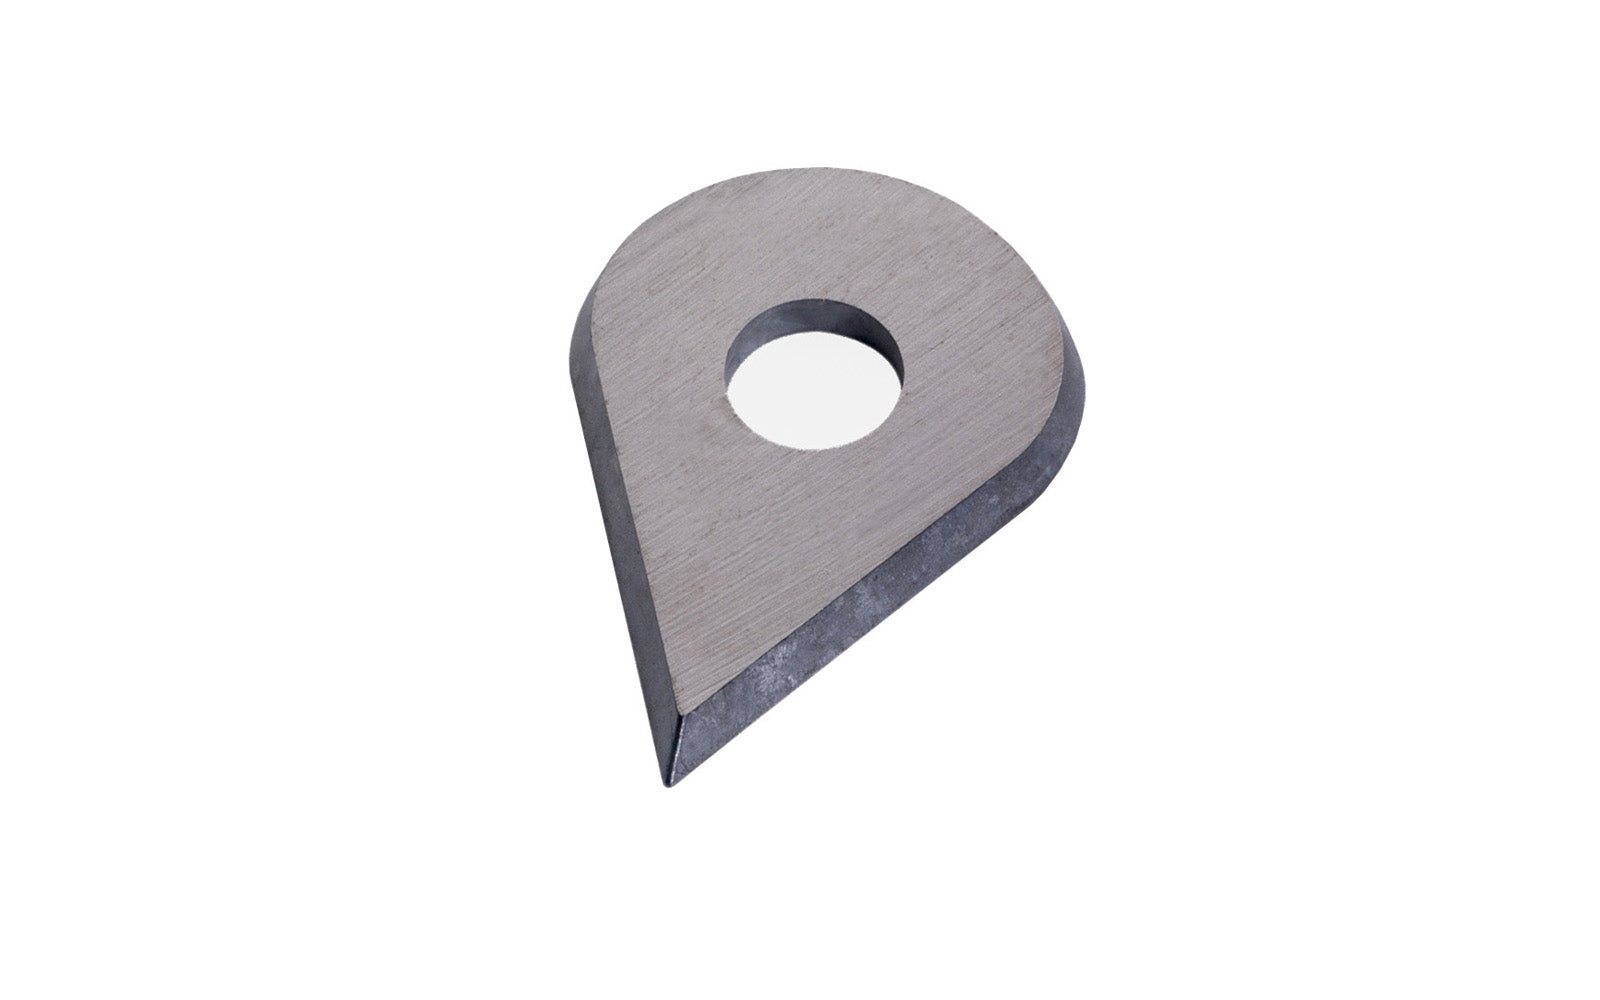 Quality Bahco Pear-Shaped Carbide Blade for the Bahco 625 Scraper. Made of cemented carbide with superior sharpness, for scraping on wood, metal or concrete. Designed for scraping on windows, frames & mouldings with different inverted radii. Model 625-DROP. 7311518221621. Made in Luxembourg.